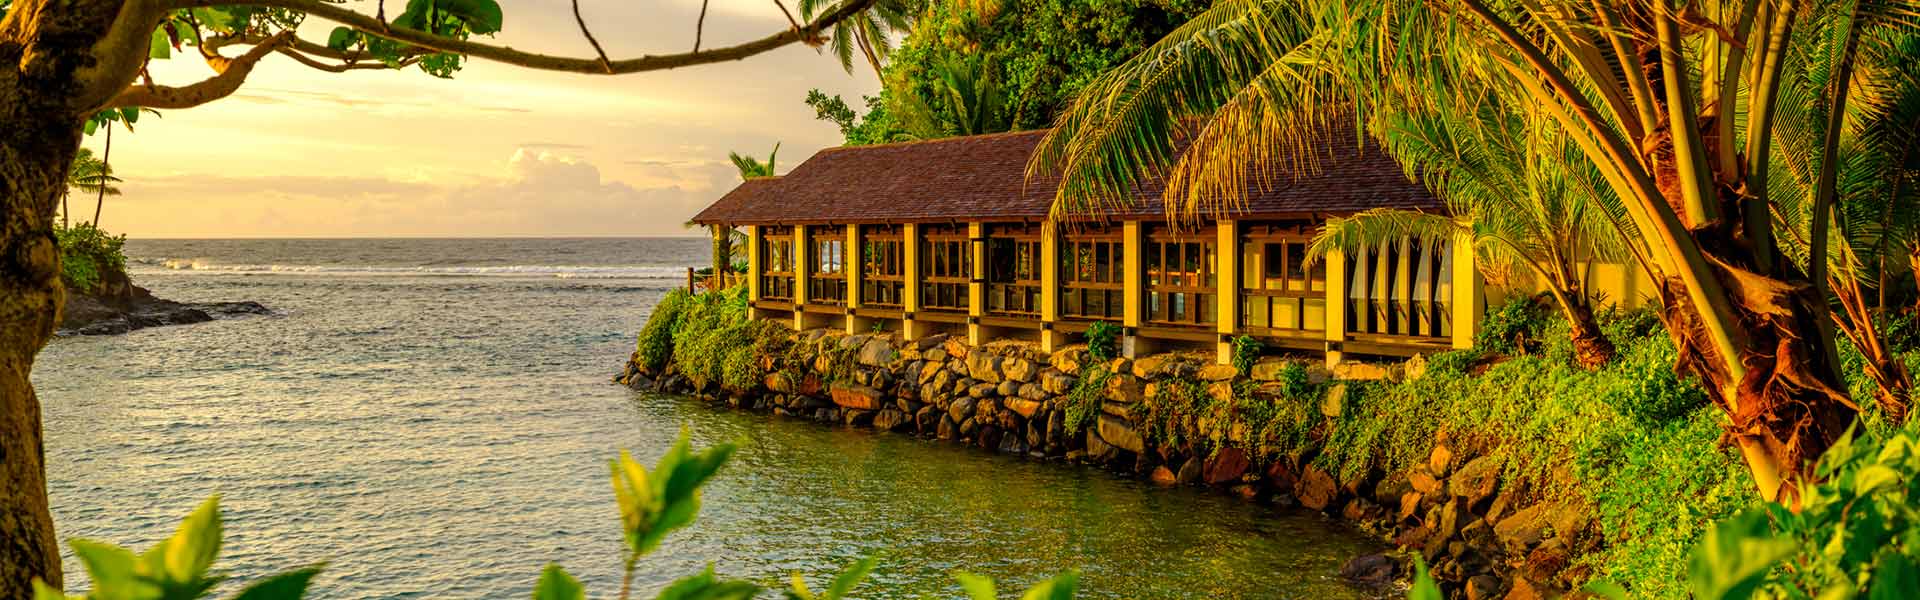 5 Nights in Samoa with Flights, All Meals, Transfers & More!